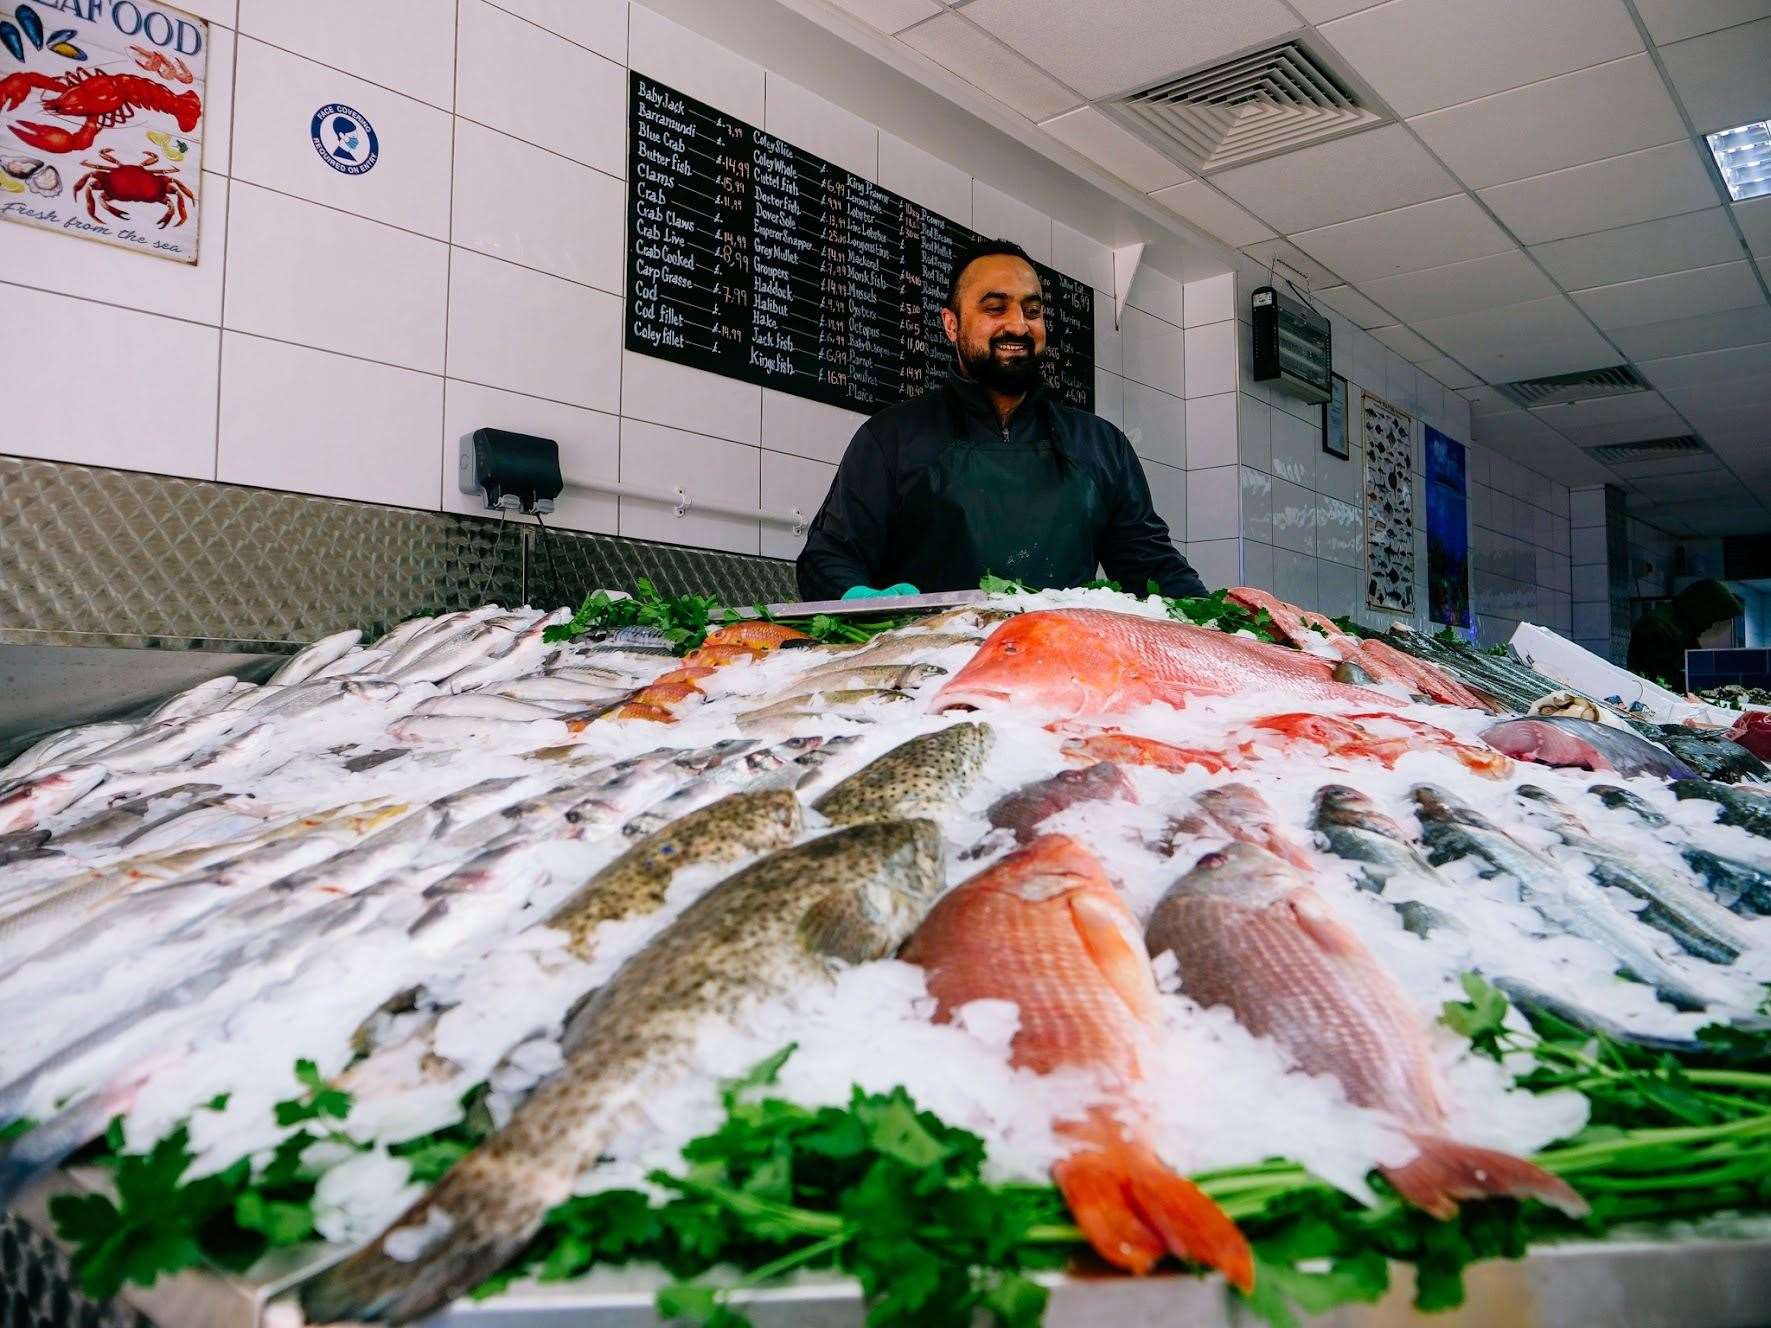 Moshtaq and the team at Kent Quality Fish worry the economic situation will force them to close